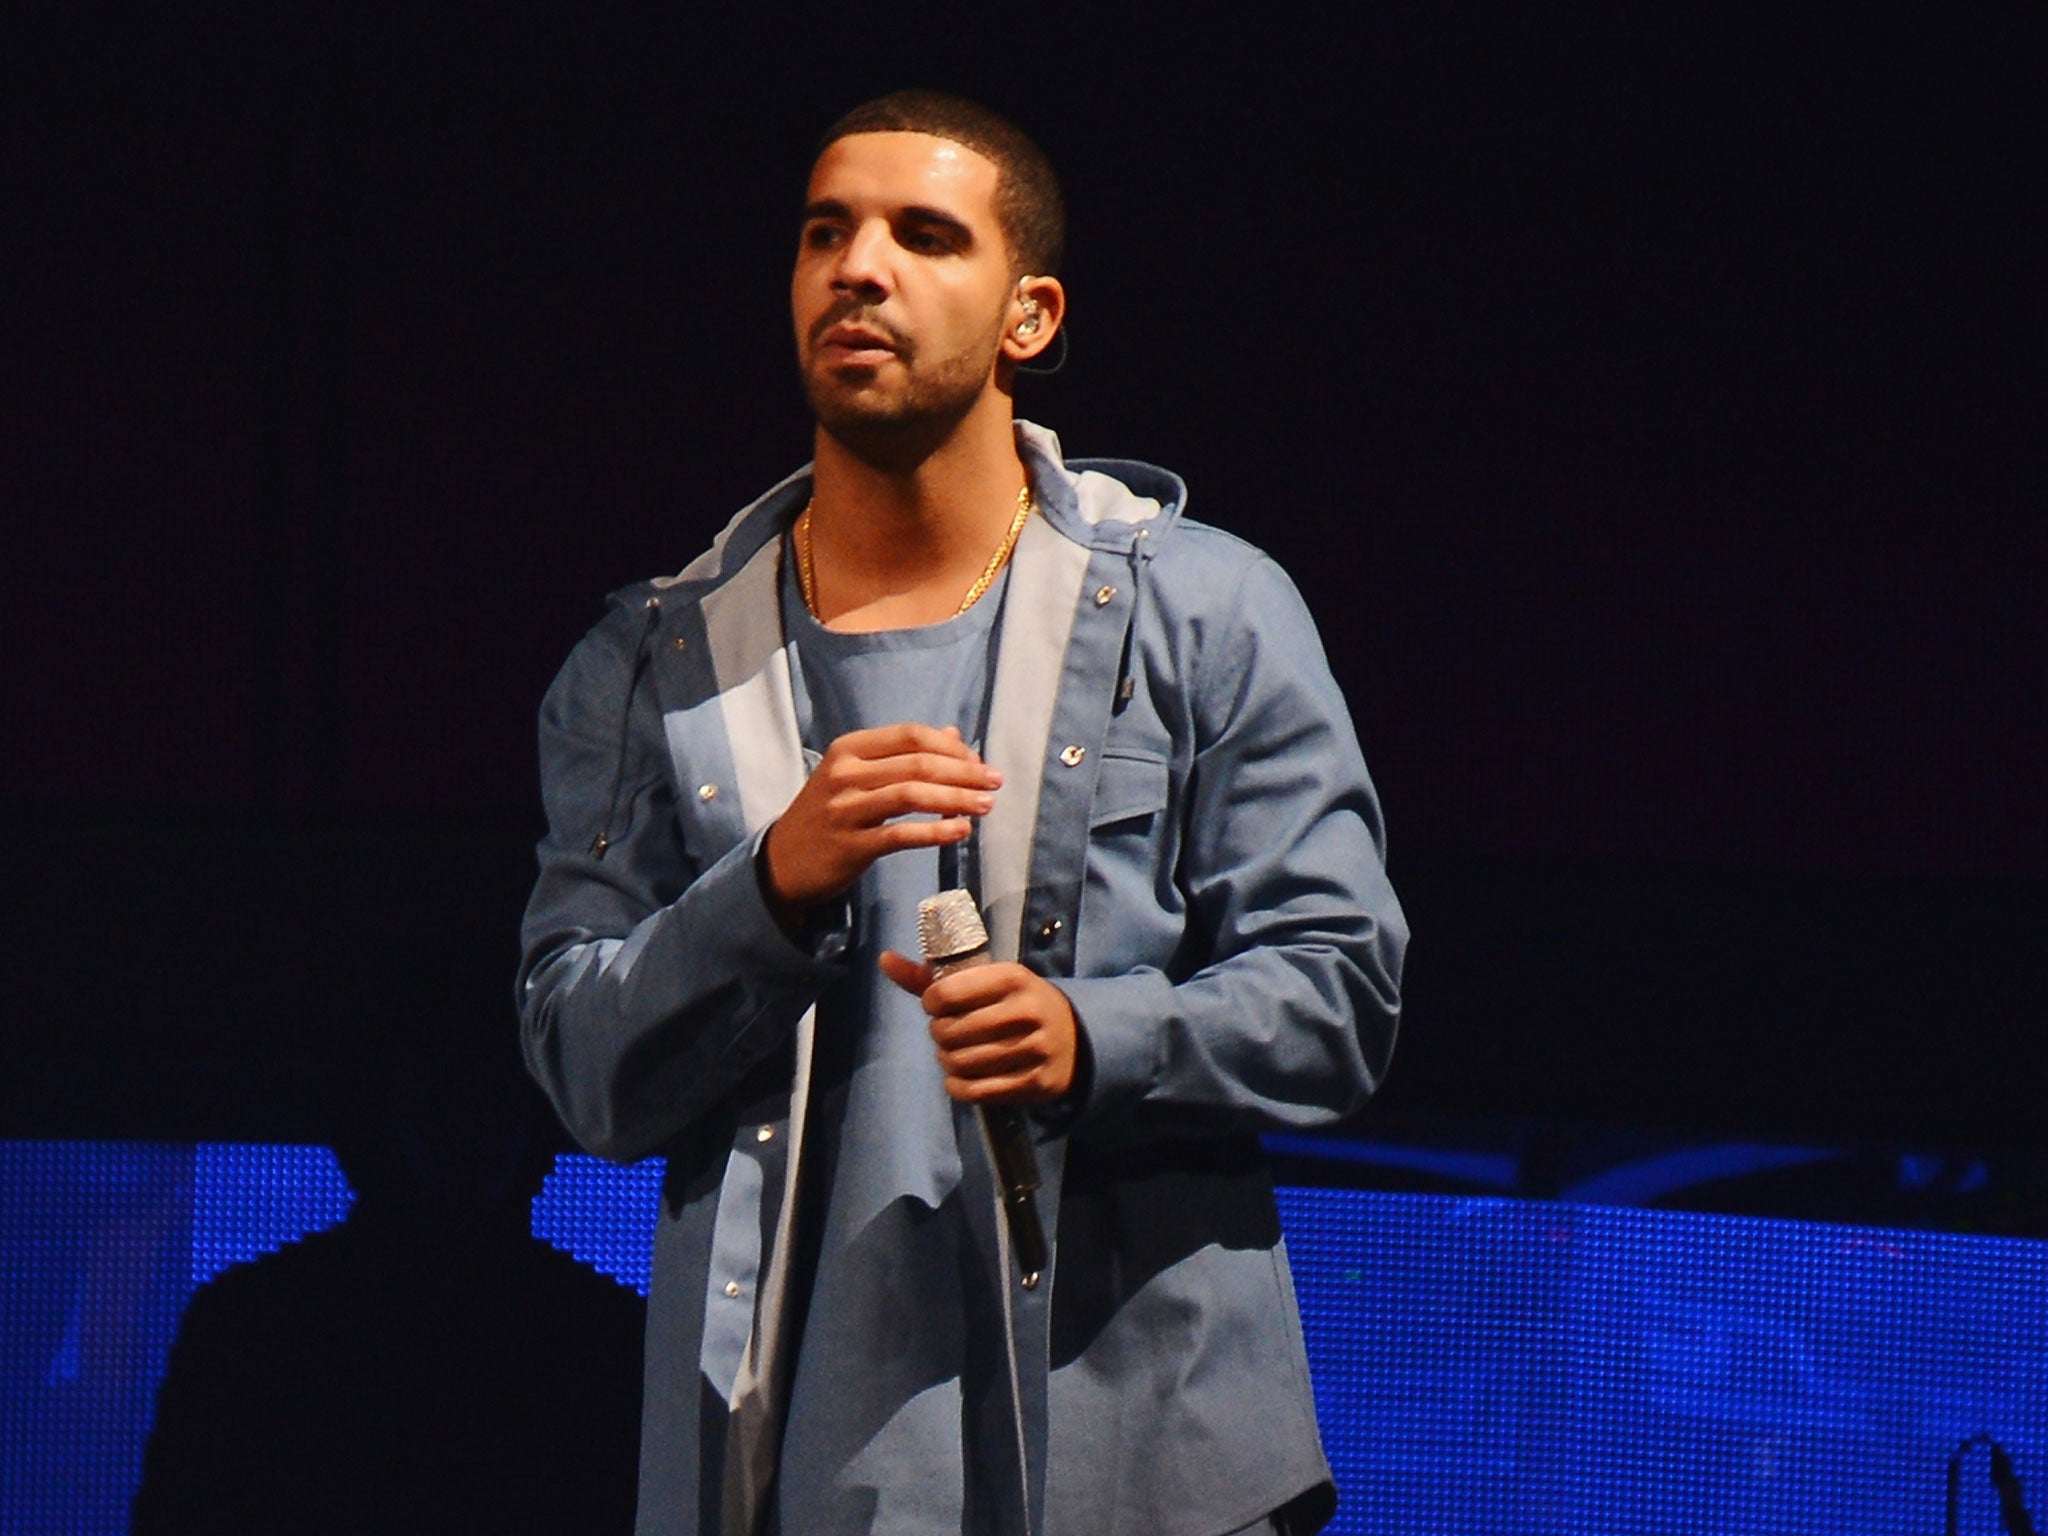 Drake performs in New York City. The rapper has said he is "disgusted" that Rolling Stone magazine gave his cover to the recently deceased actor Philip Seymour Hoffman